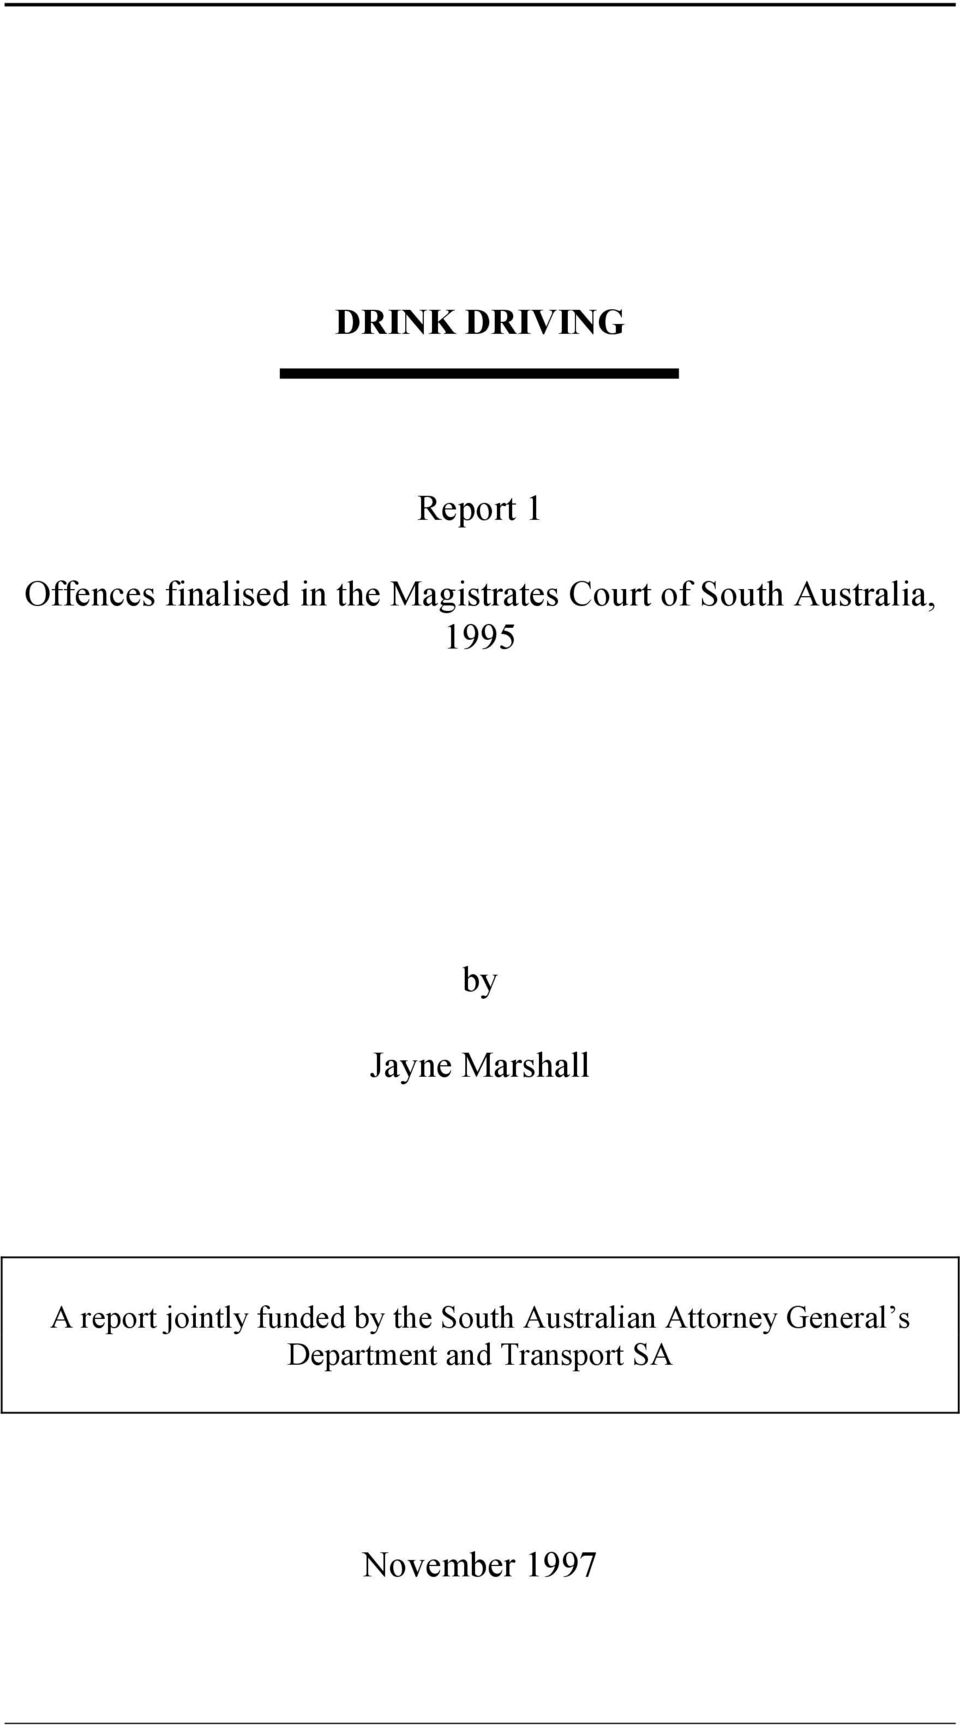 Marshall A report jointly funded by the South